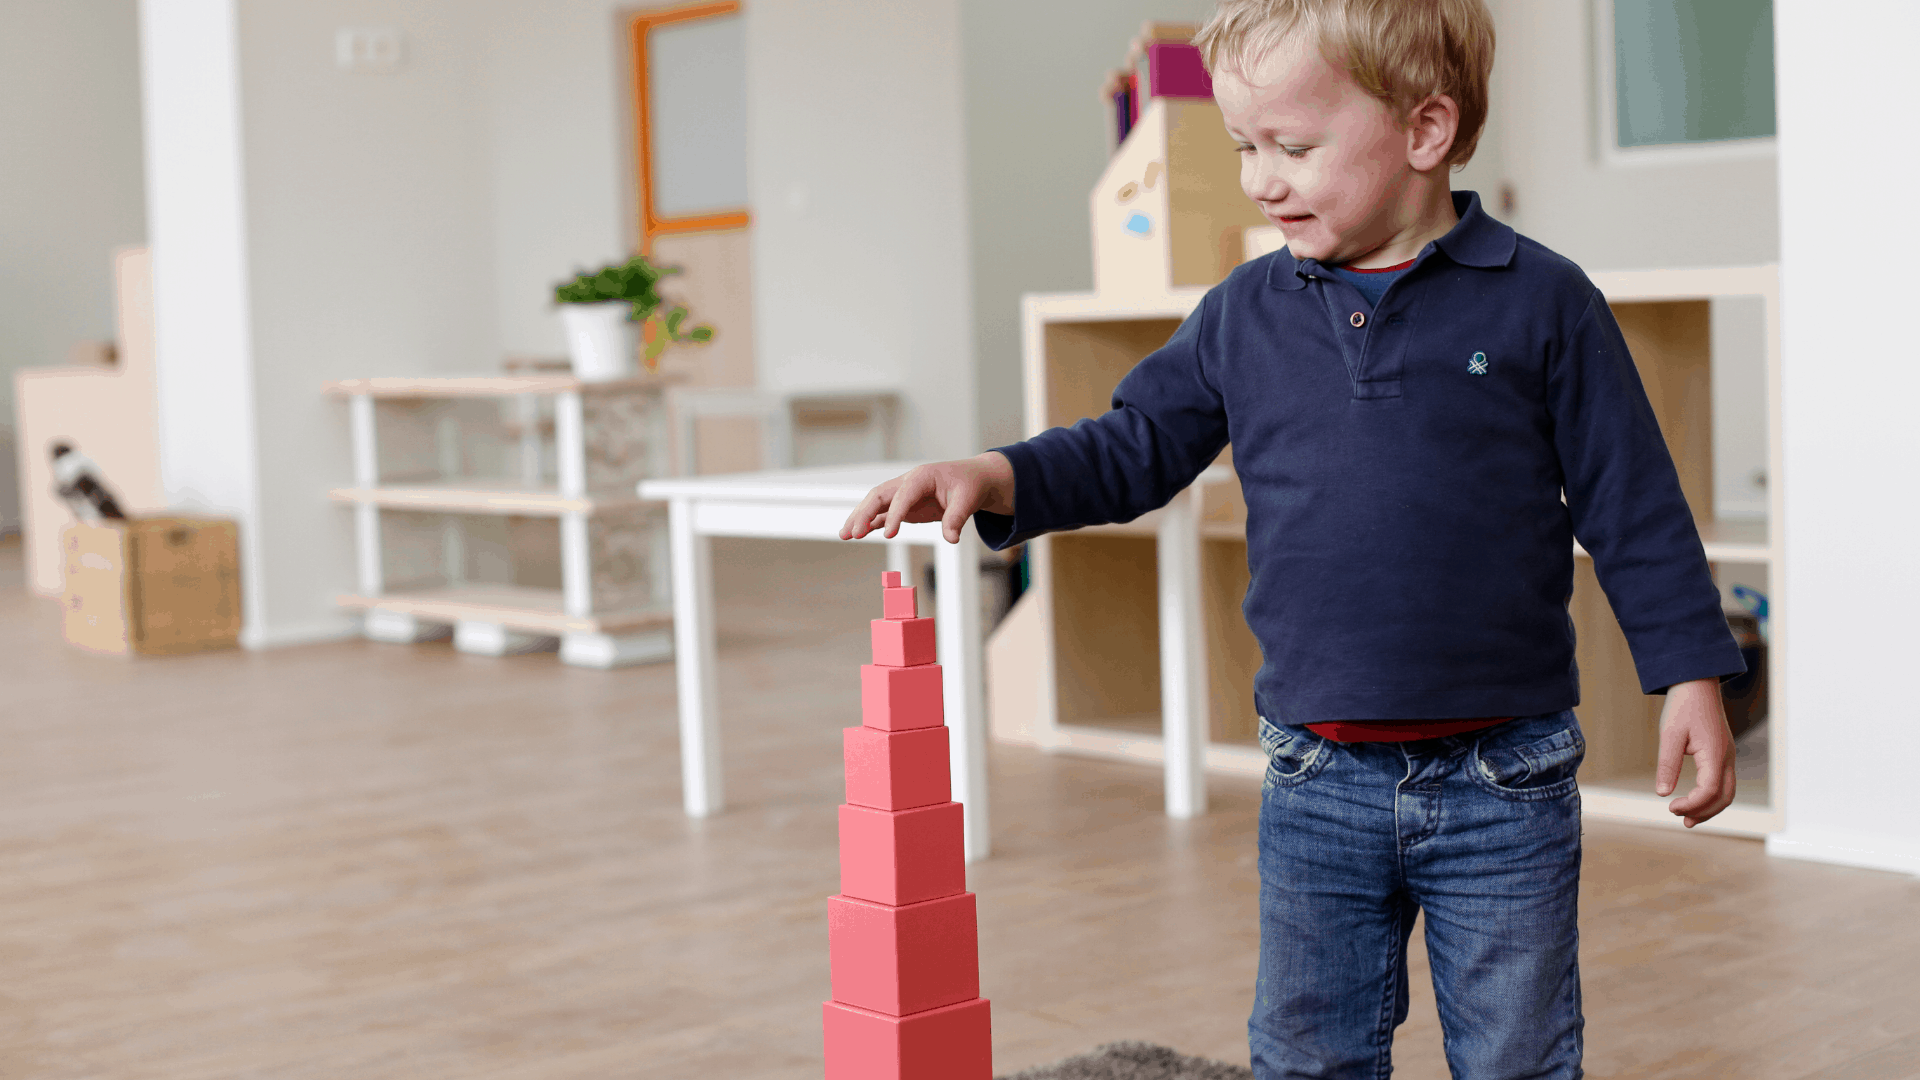 Montessori Trays: Why, How, And When to Use Them